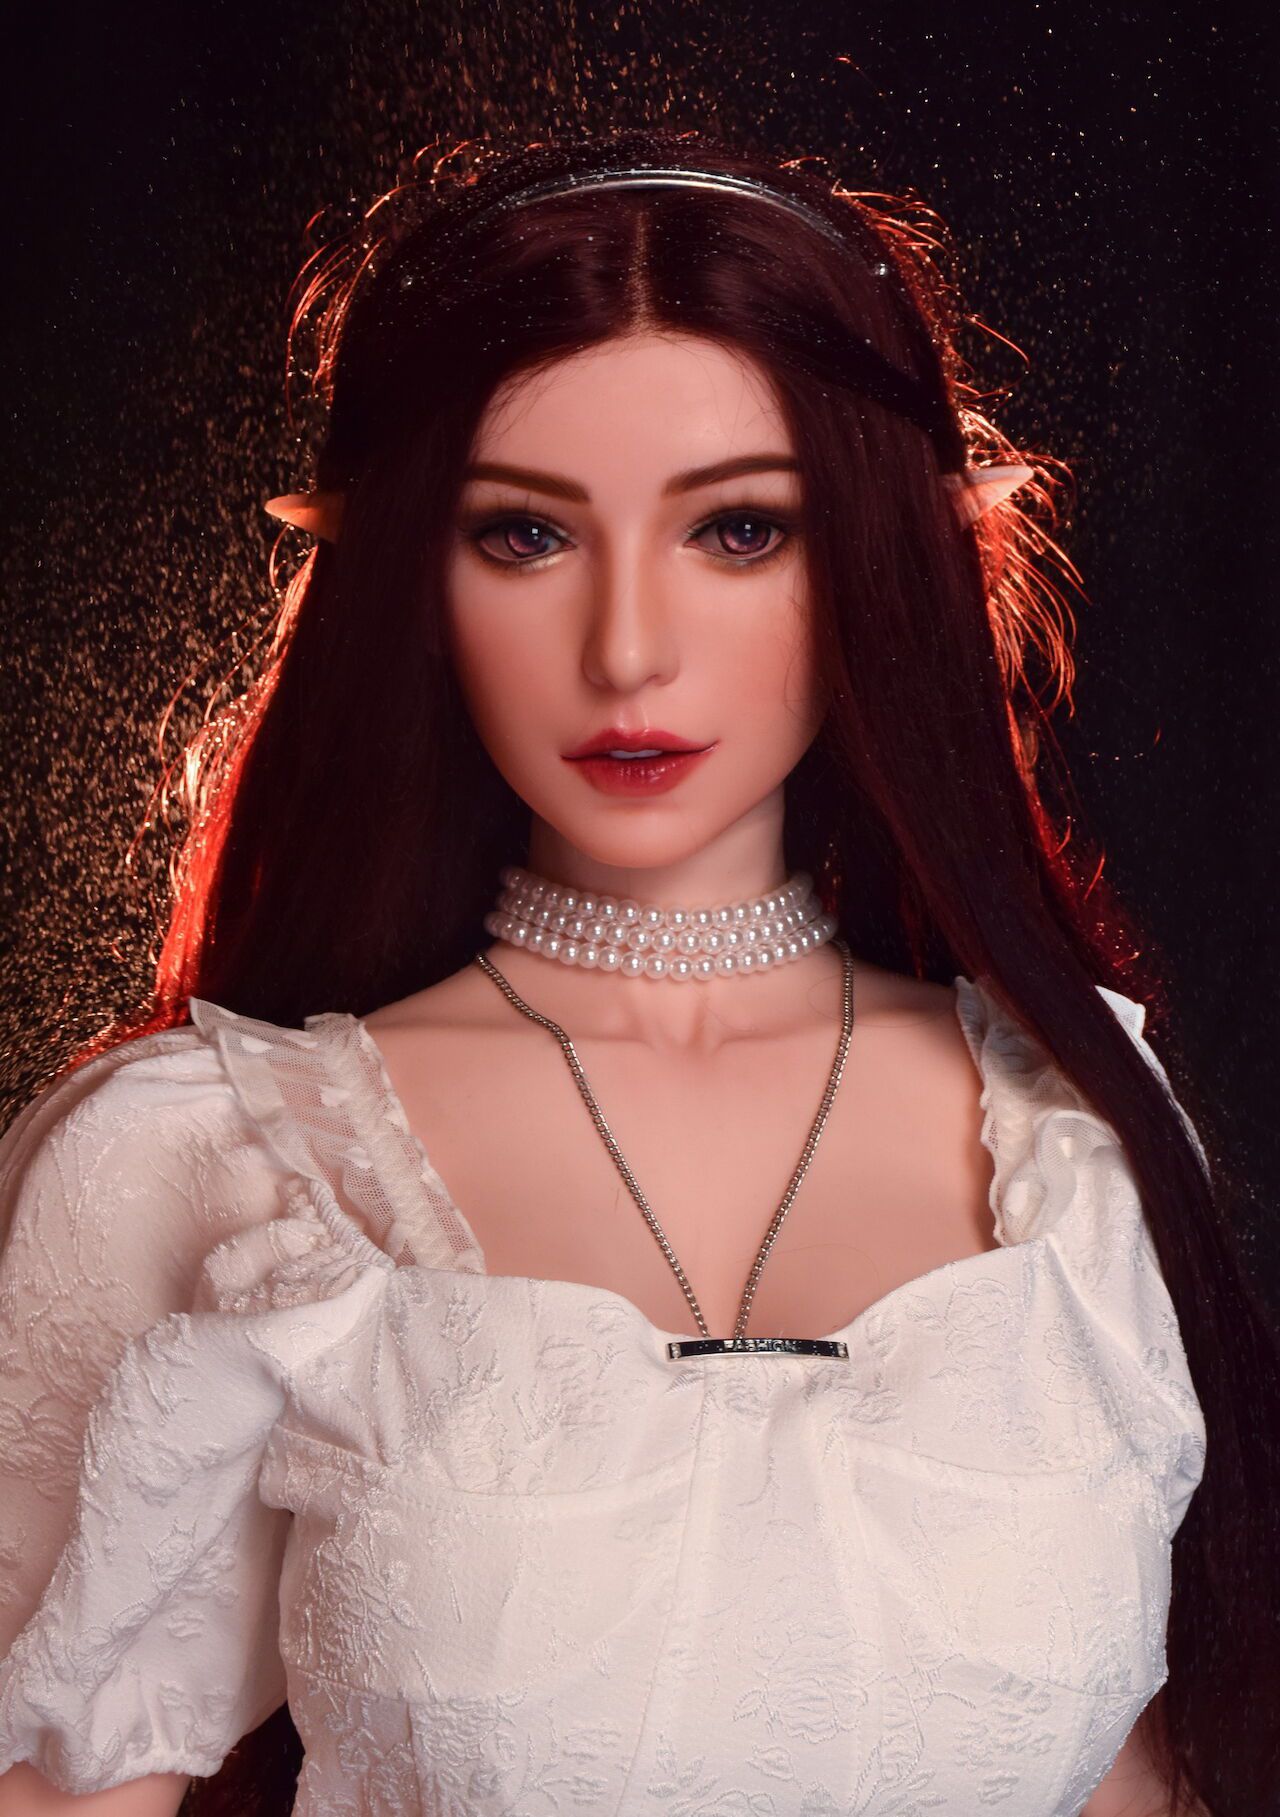 Here is the another photo set of the doll under development. The final version will be released soon! MollyRedWolf x Elsa Babe 1